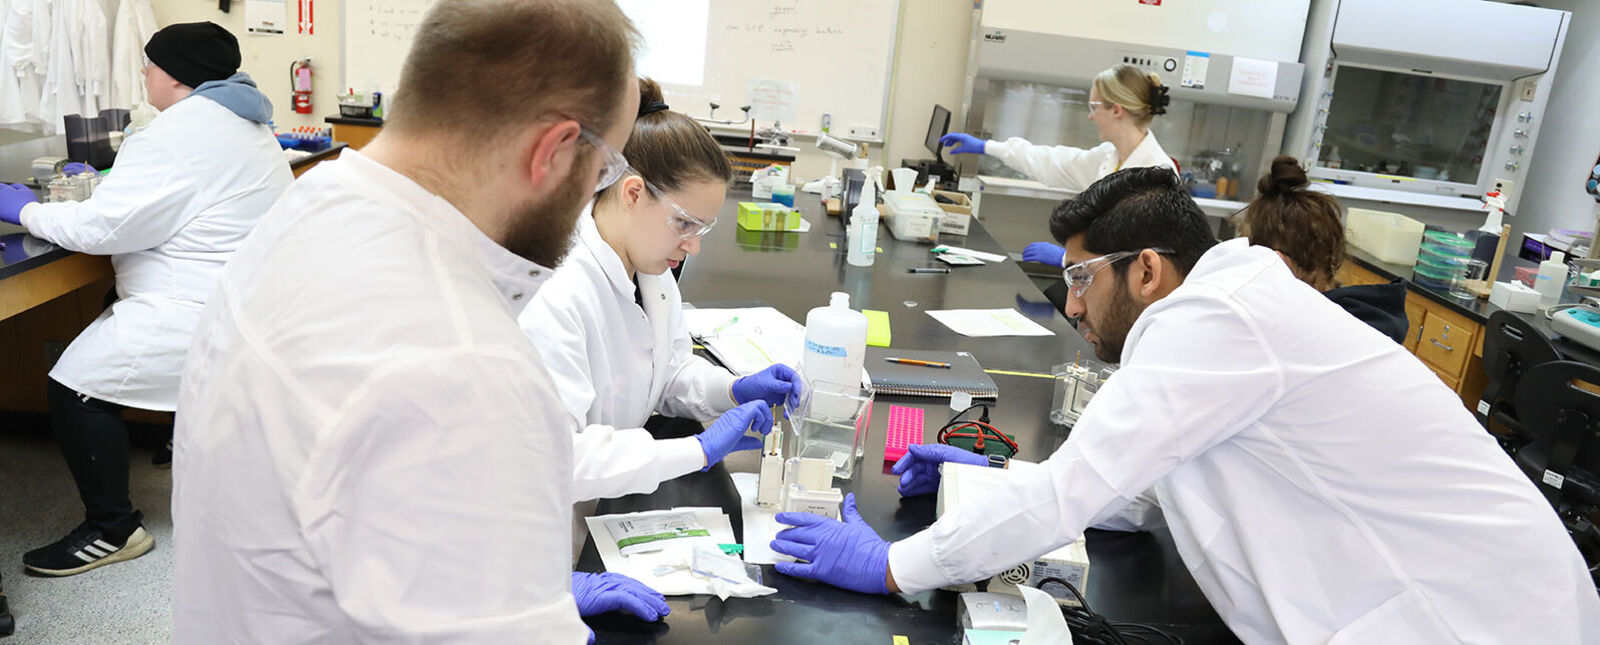 A group of students work in a laboratory